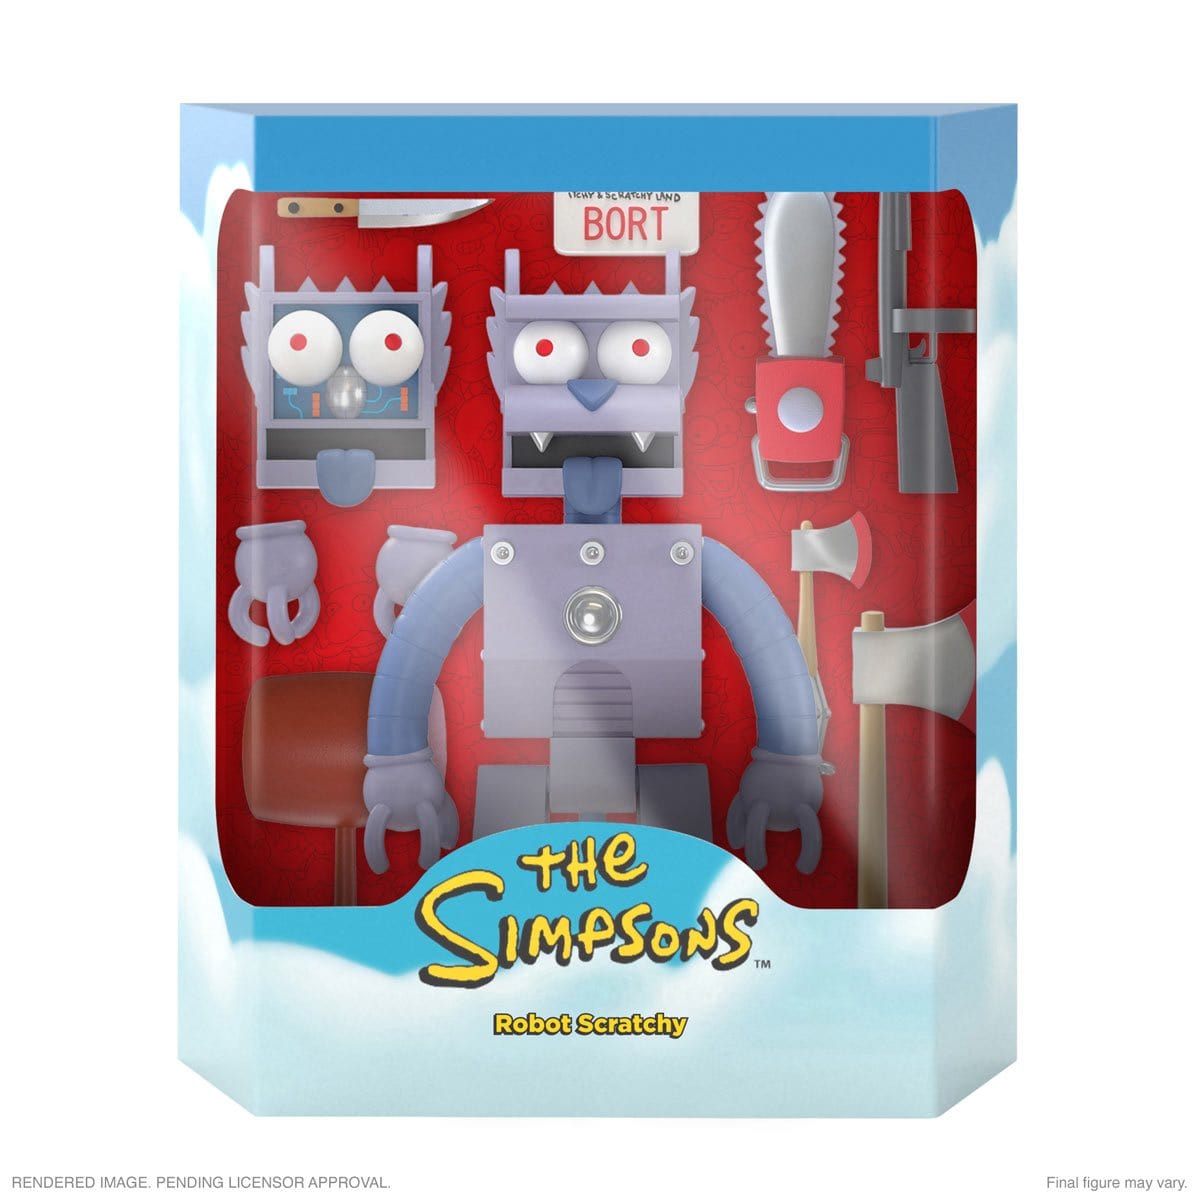 The Simpsons Robot Scratchy Super7 Ultimates 7-Inch Action Figure Pop-O-Loco